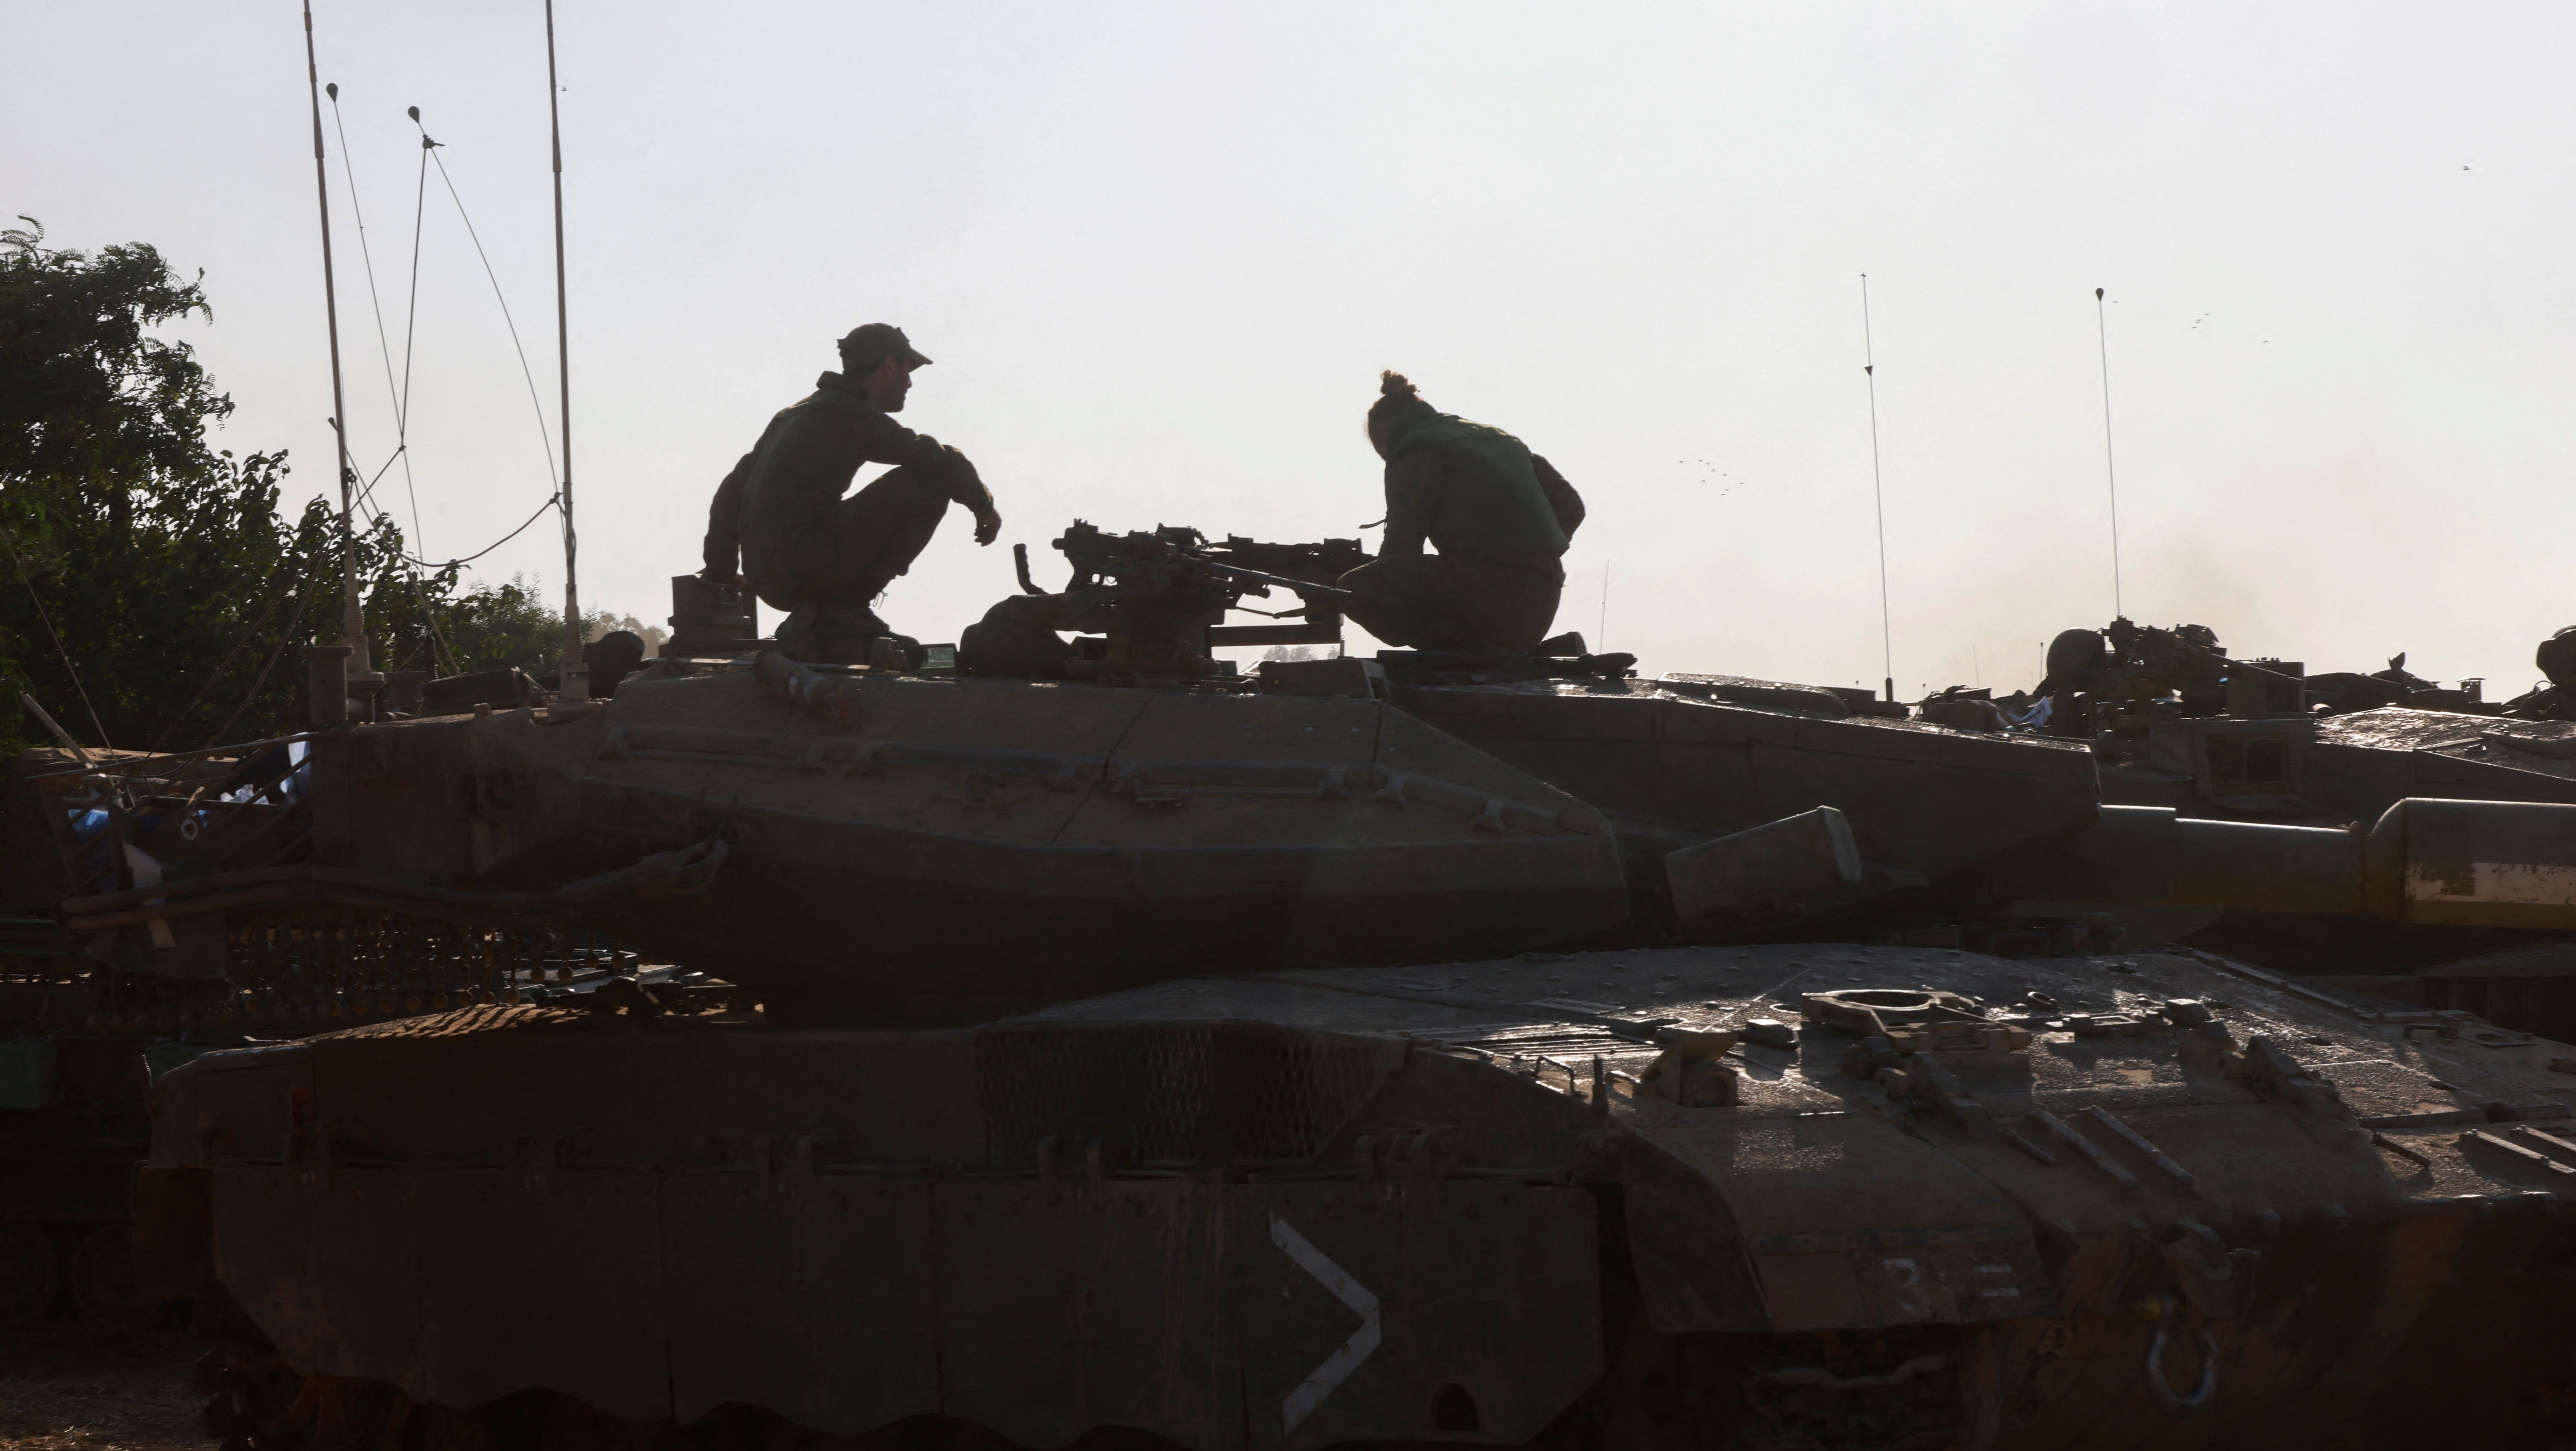 Wounded in Gaza: Israeli Tank Reservist Tells of Narrowly Escaping Death